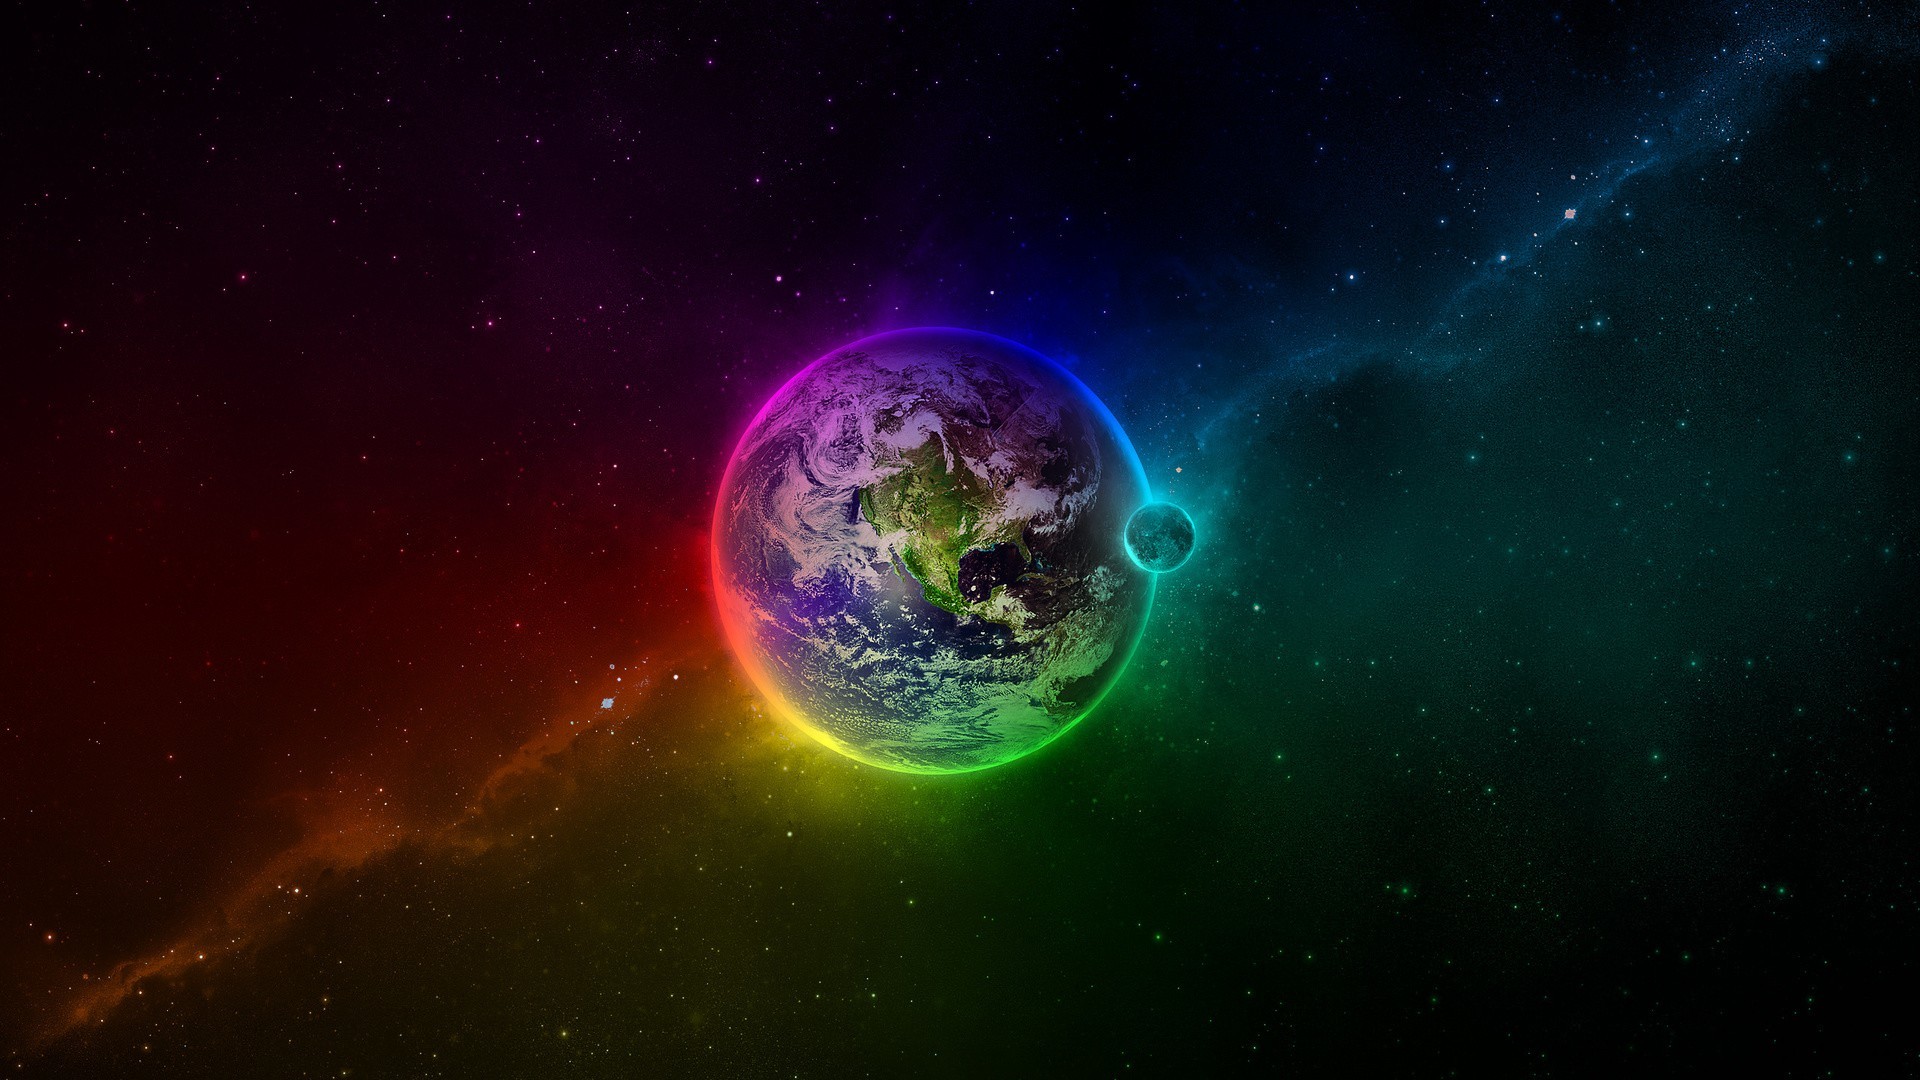 1920x1080 Earth Space High Resolution Background High Definition Wallpaper .